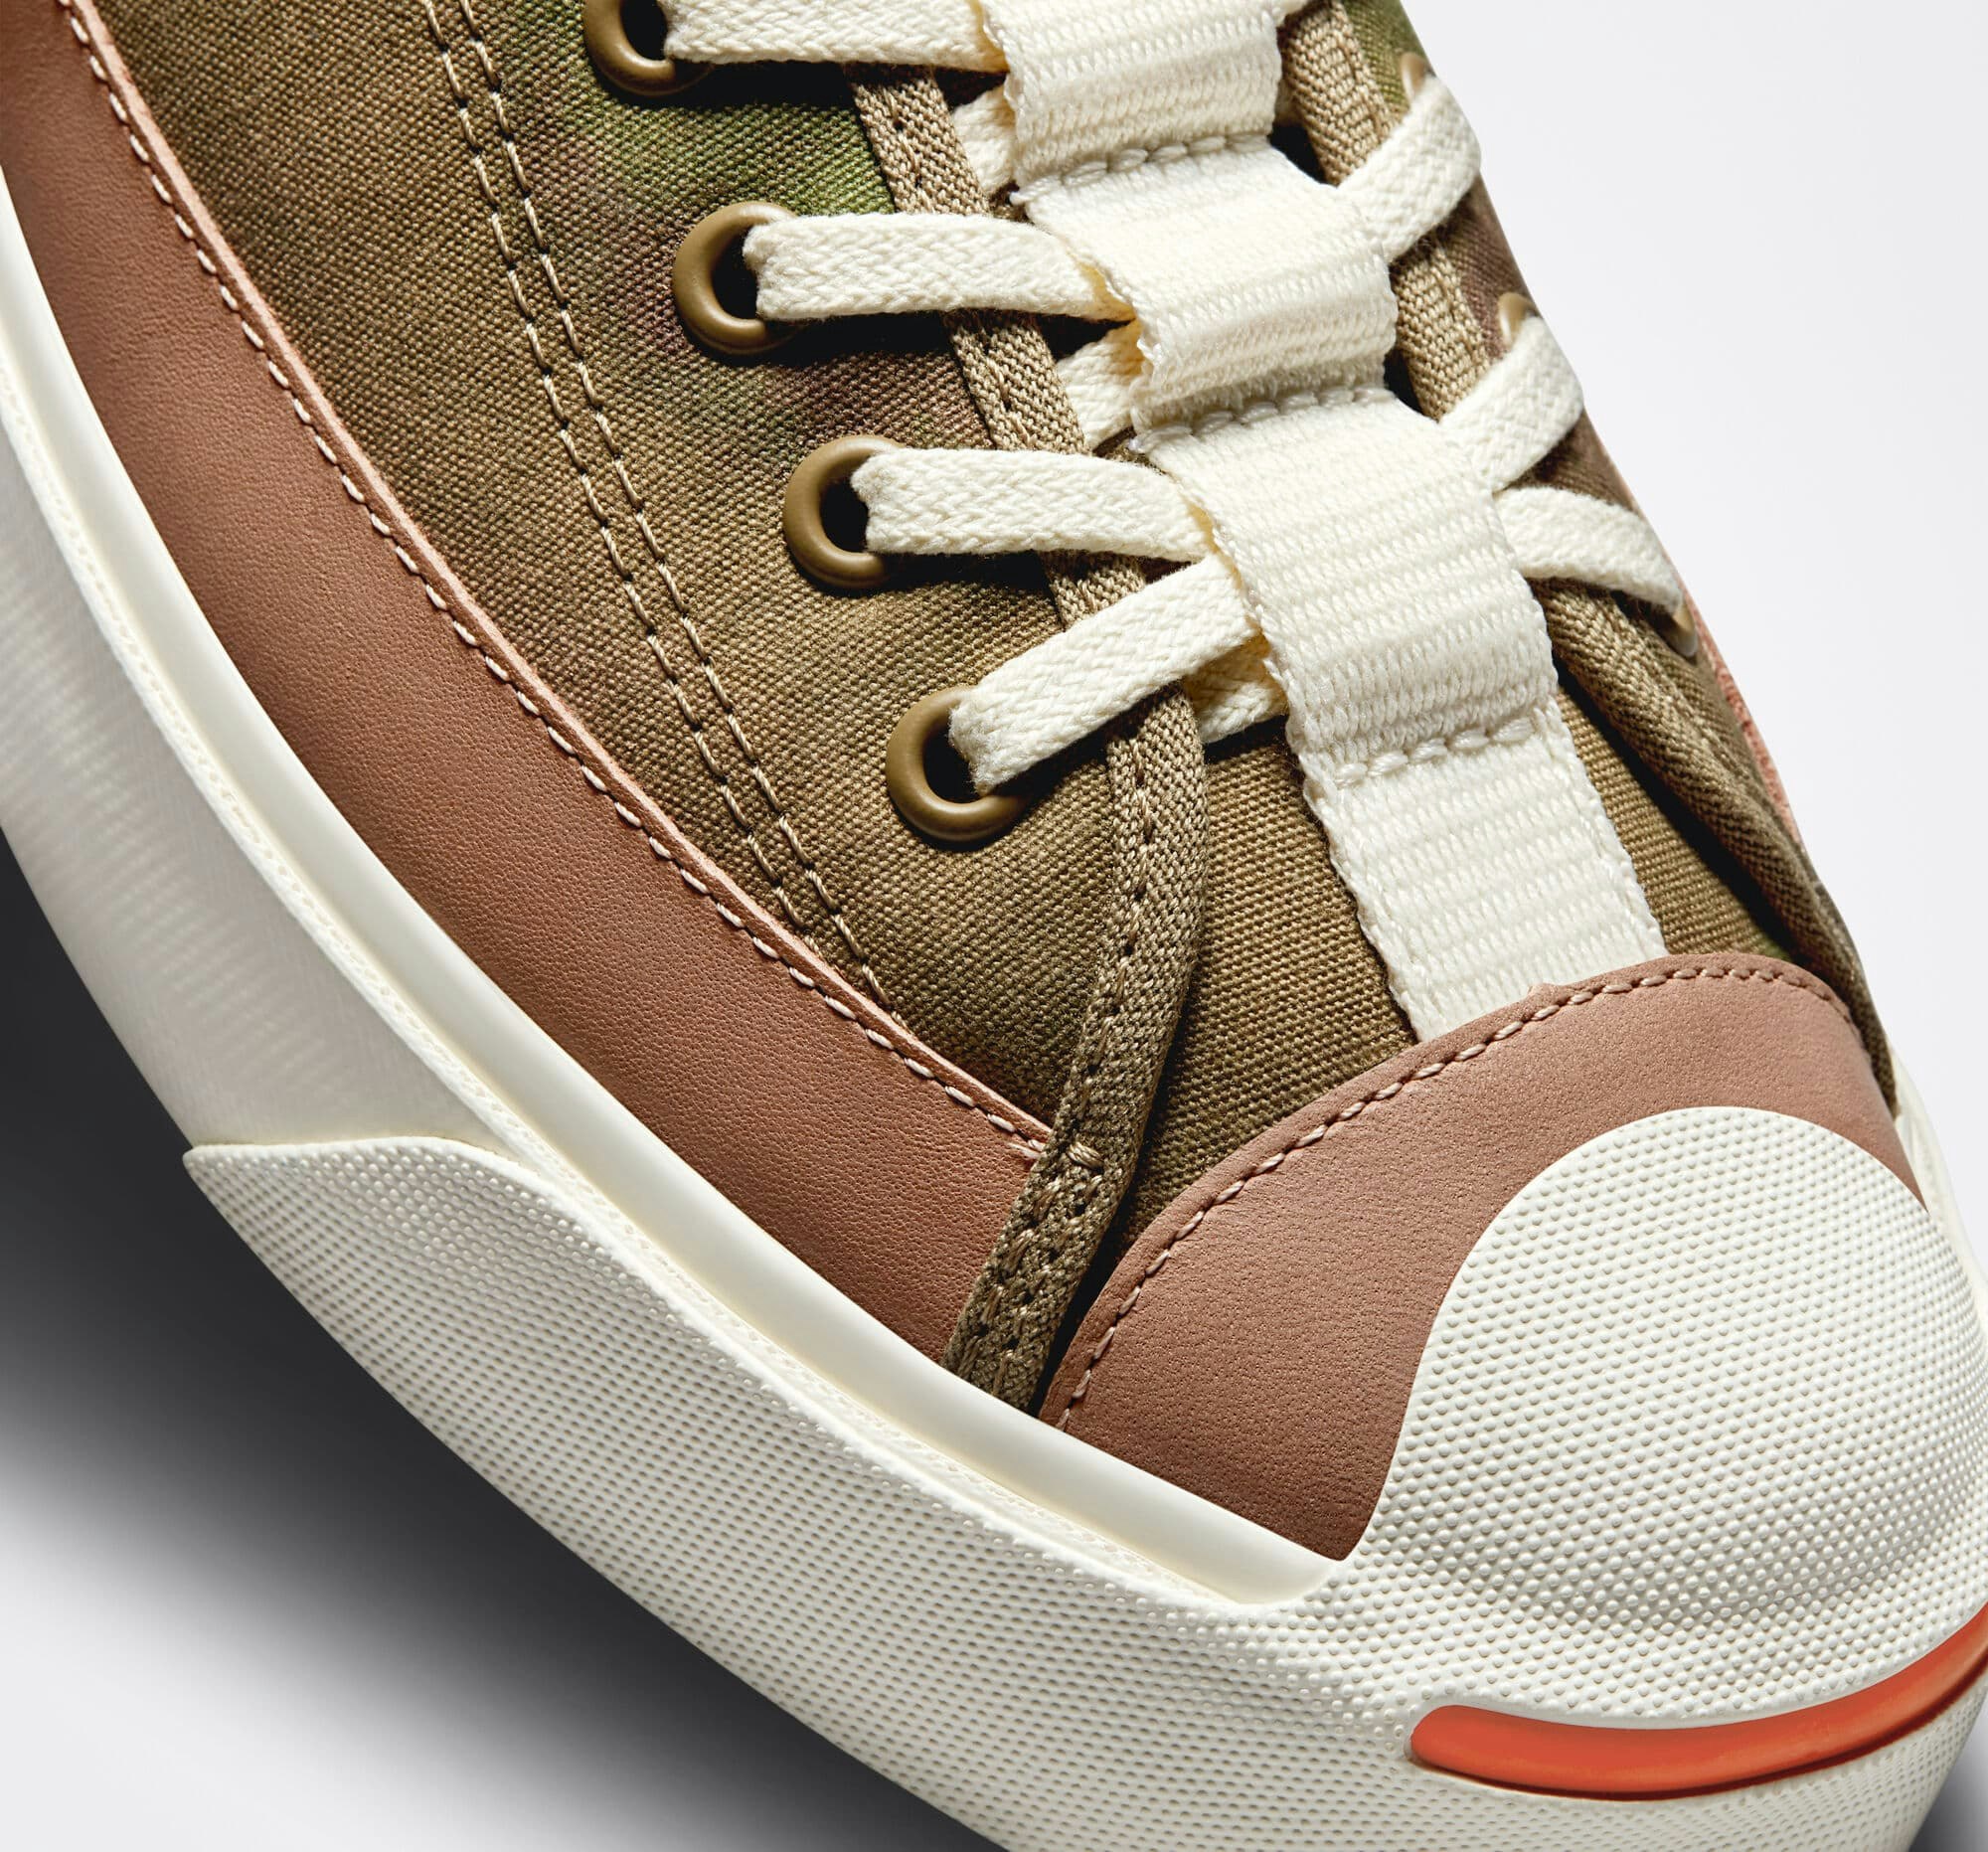 Todd Snyder x Converse Jack Purcell "Elmwood"